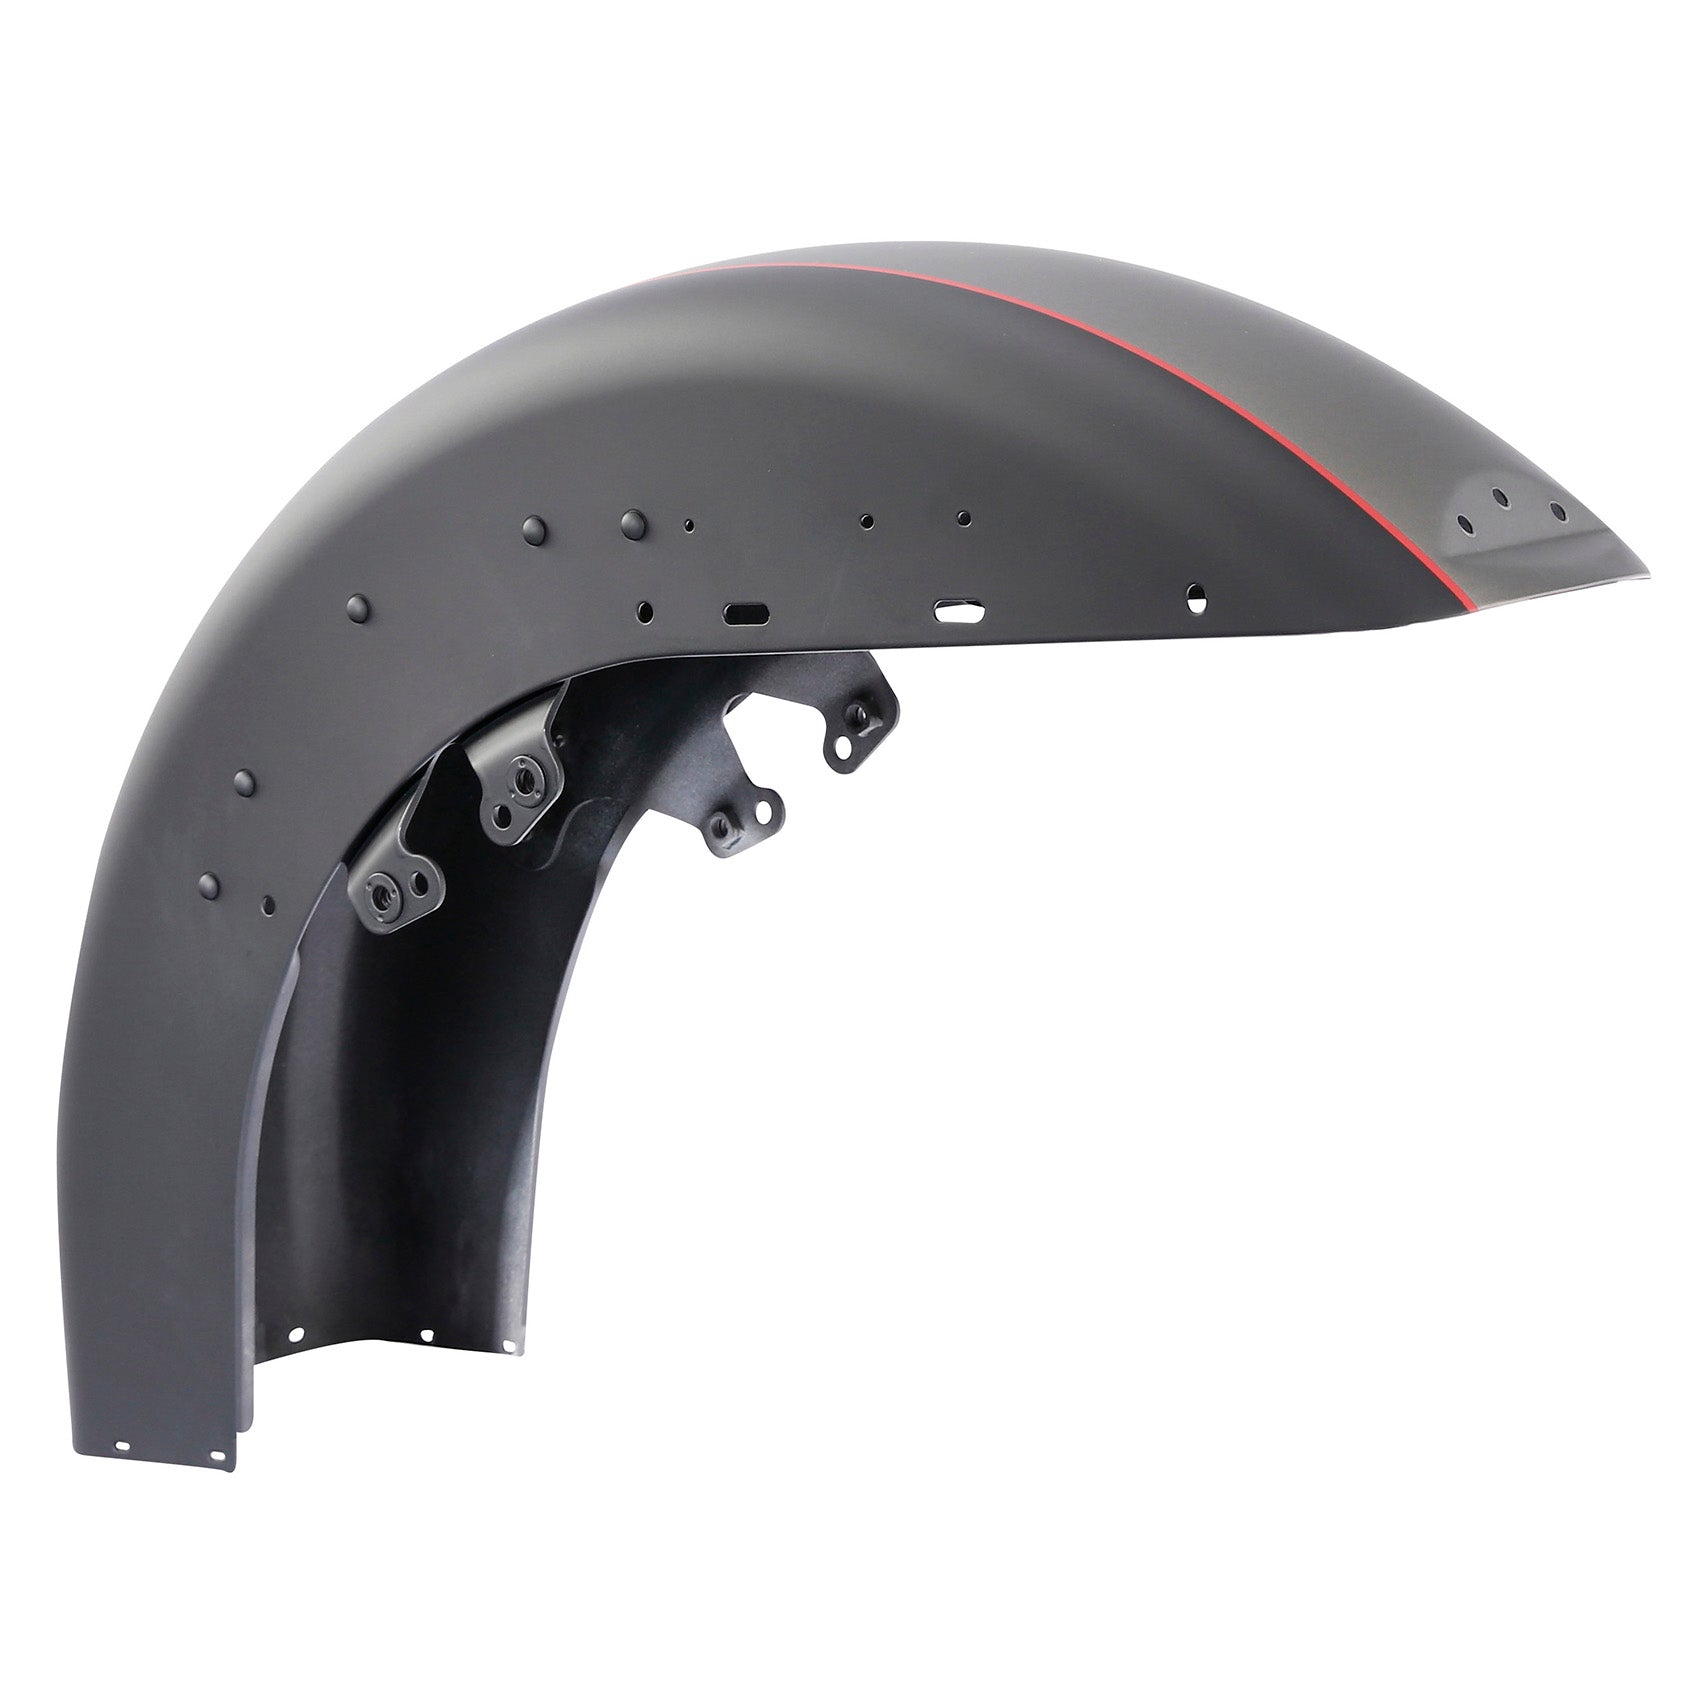 HR3 Industrial Gray Denim / Black Denim Motorcycle Front Mudguard Fender (can be installed with lighting)